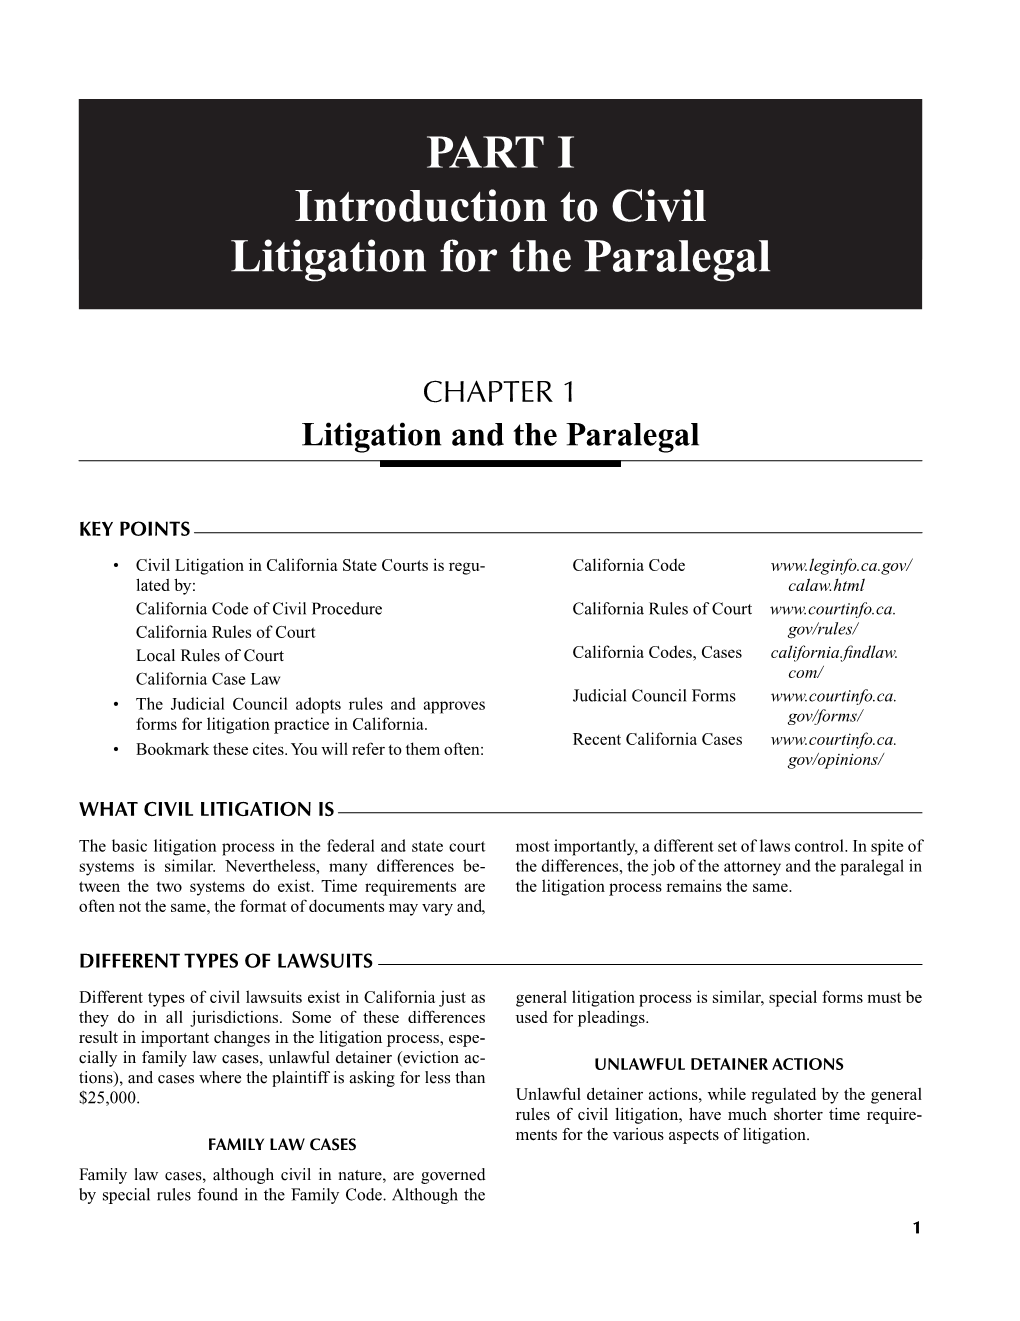 PART I Introduction to Civil Litigation for the Paralegal